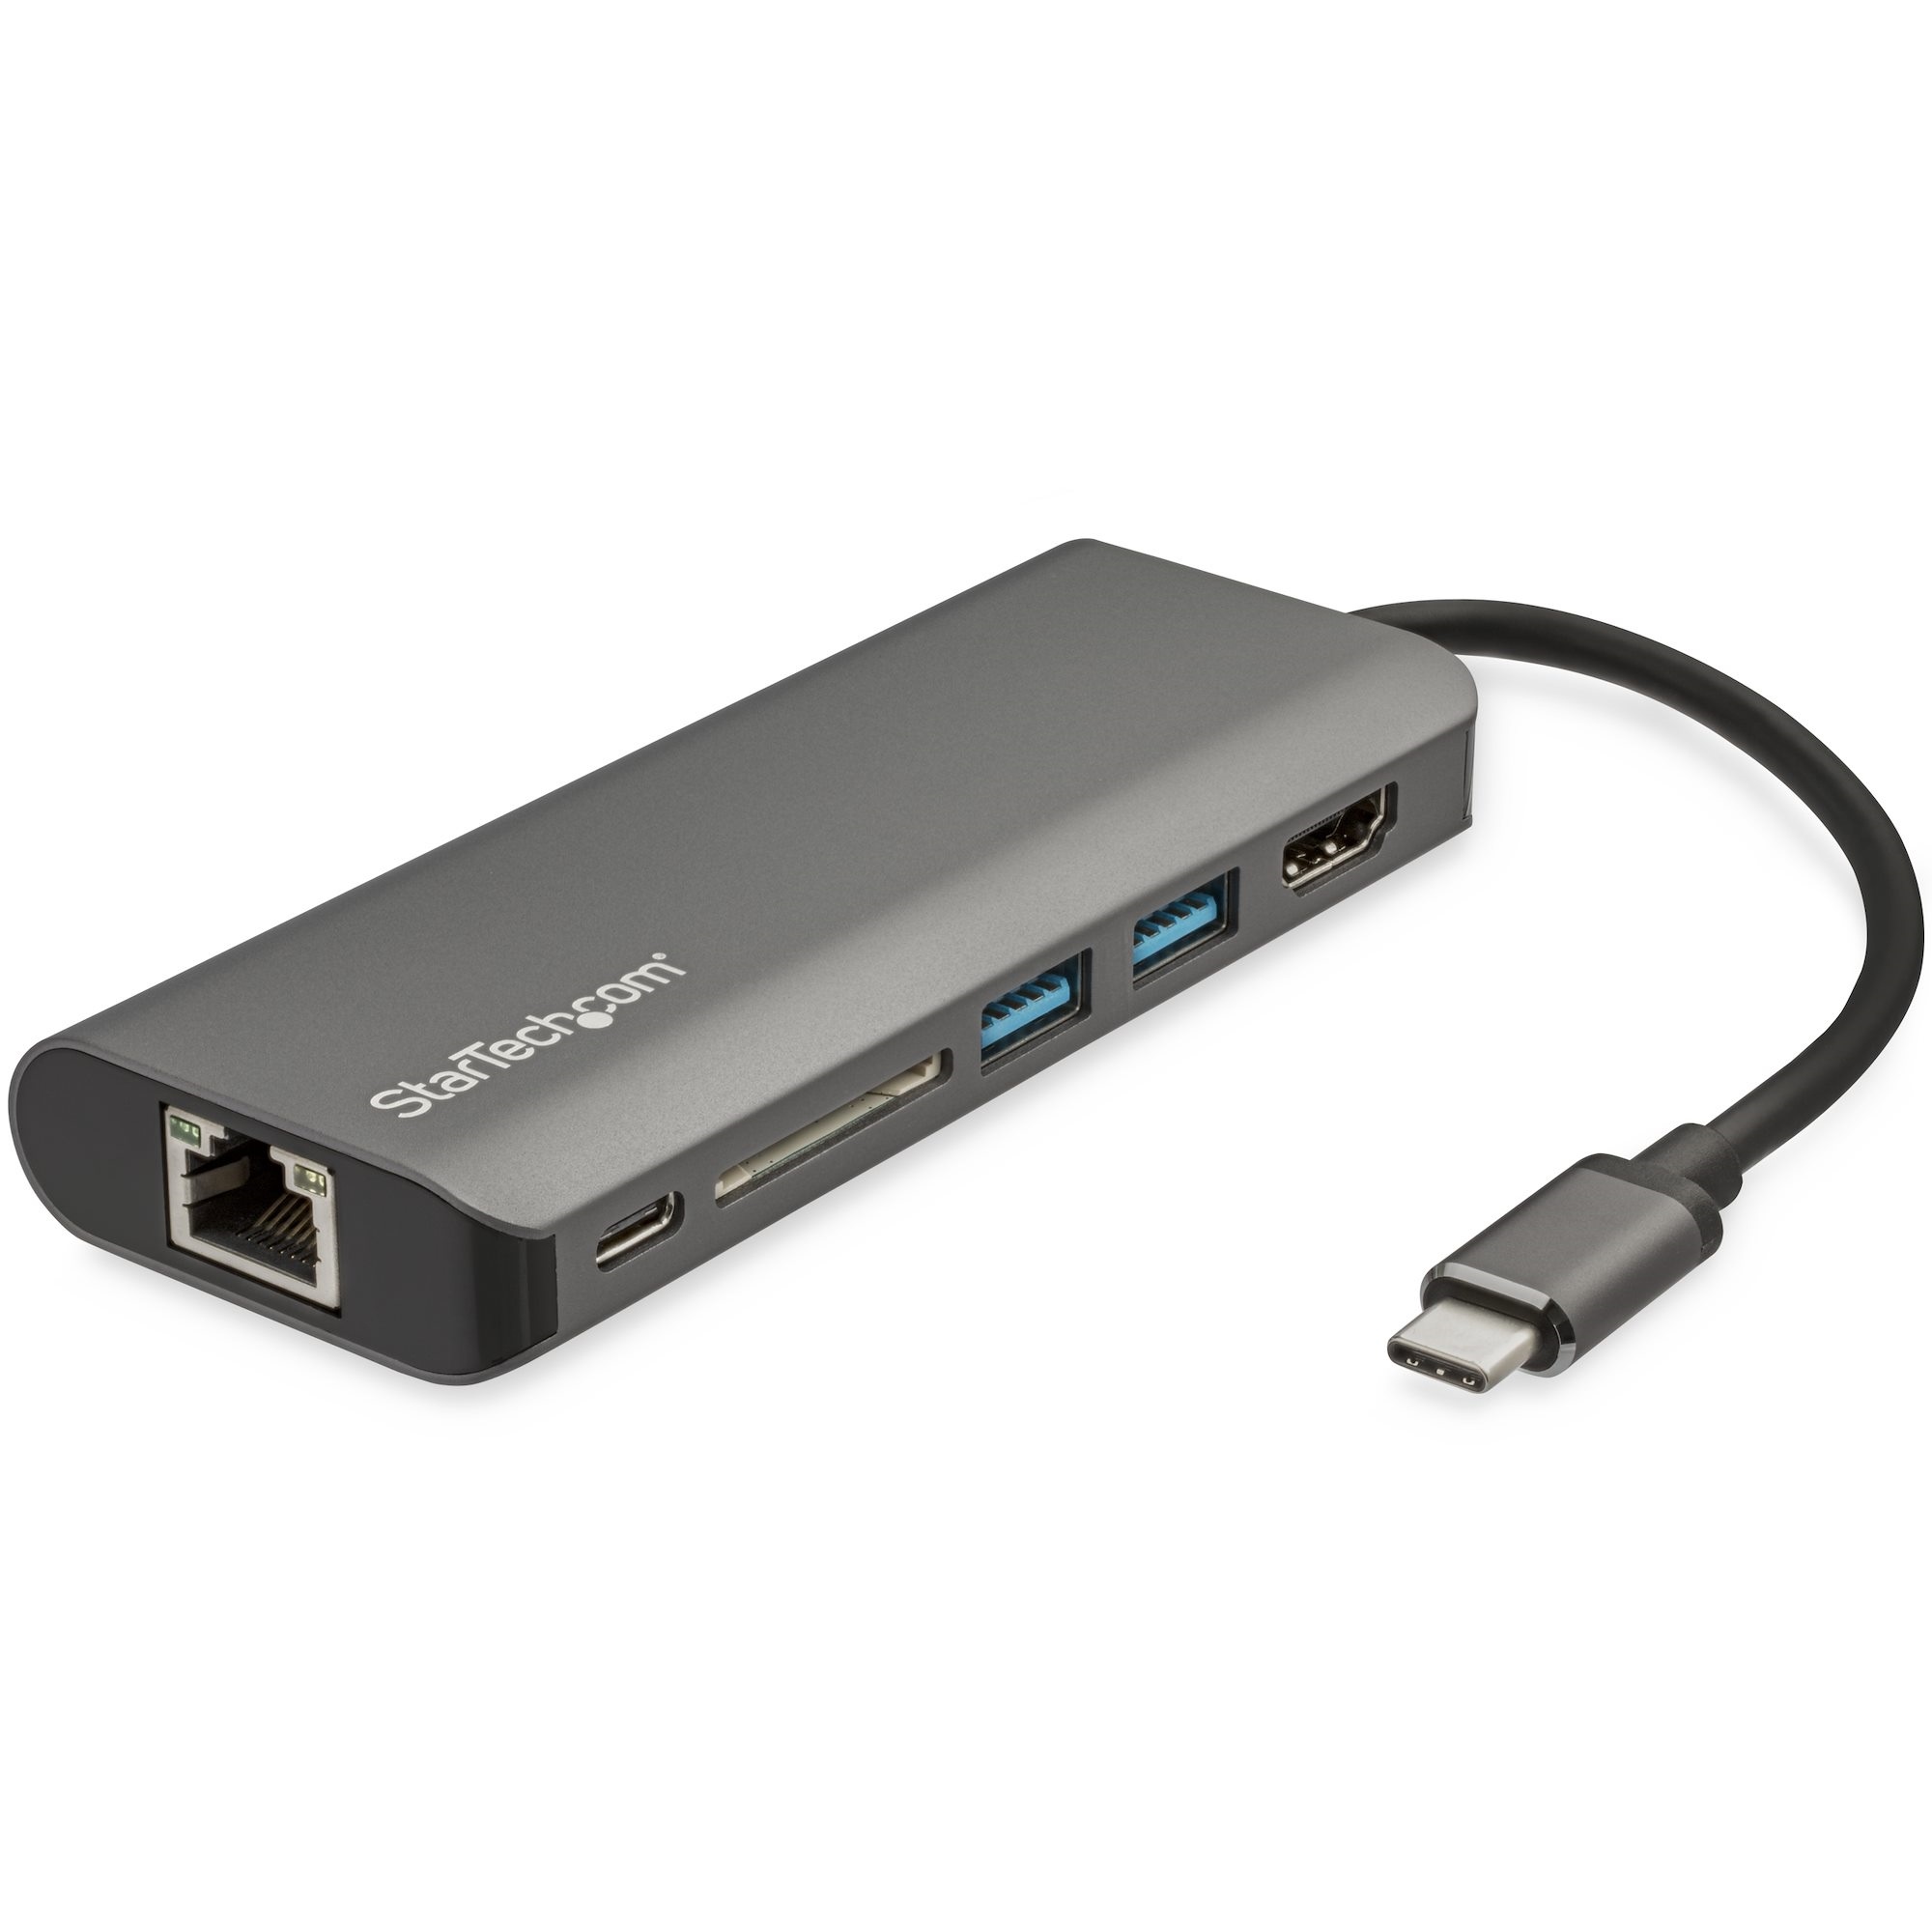 StarTech USB-C Multiport Adapter with HDMI and Power Delivery